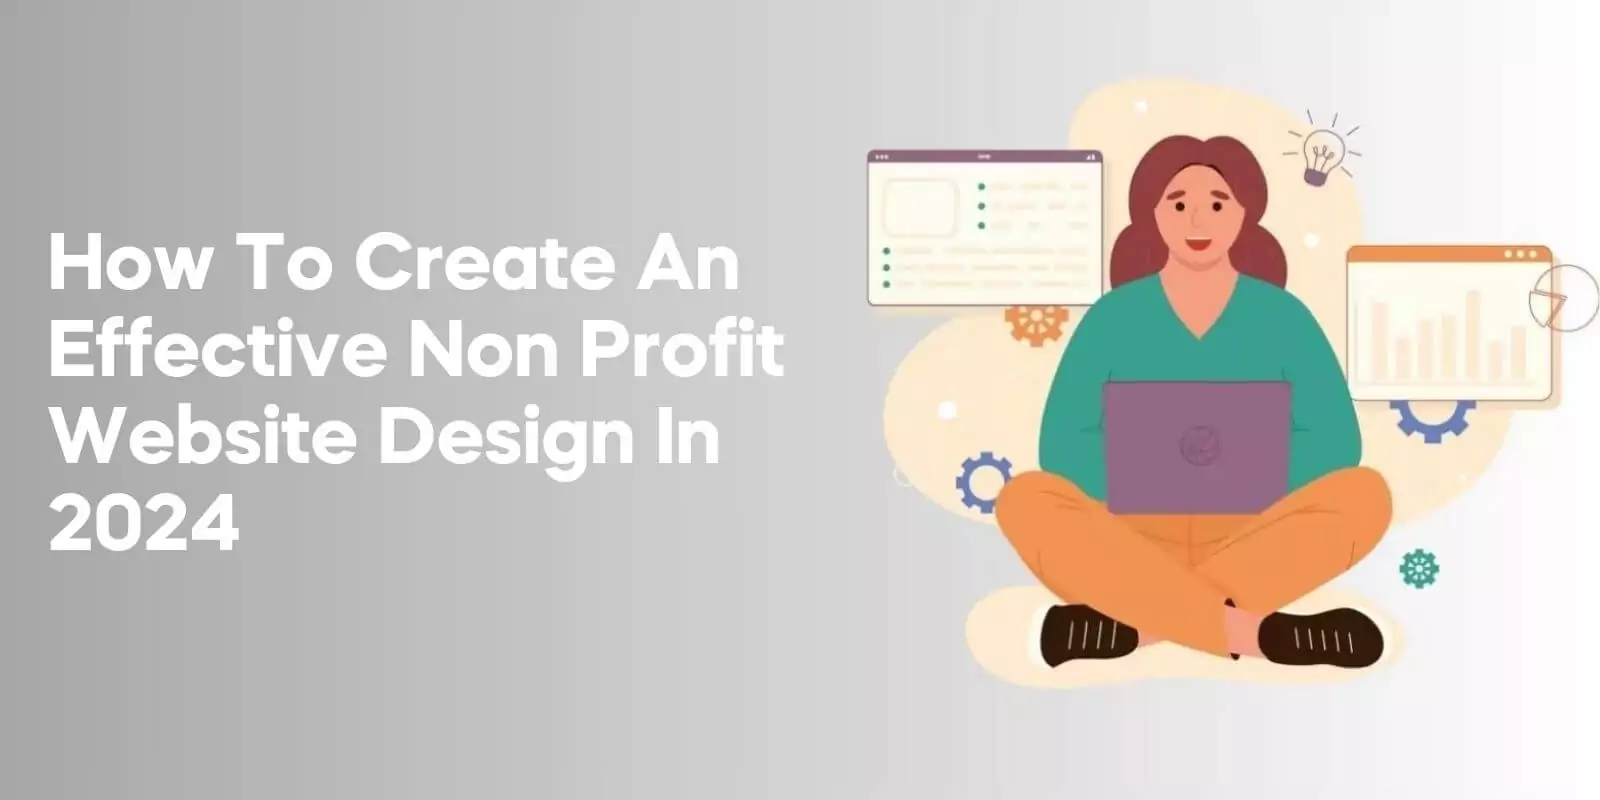 How to Create an Effective Non Profit Website Design in 2024